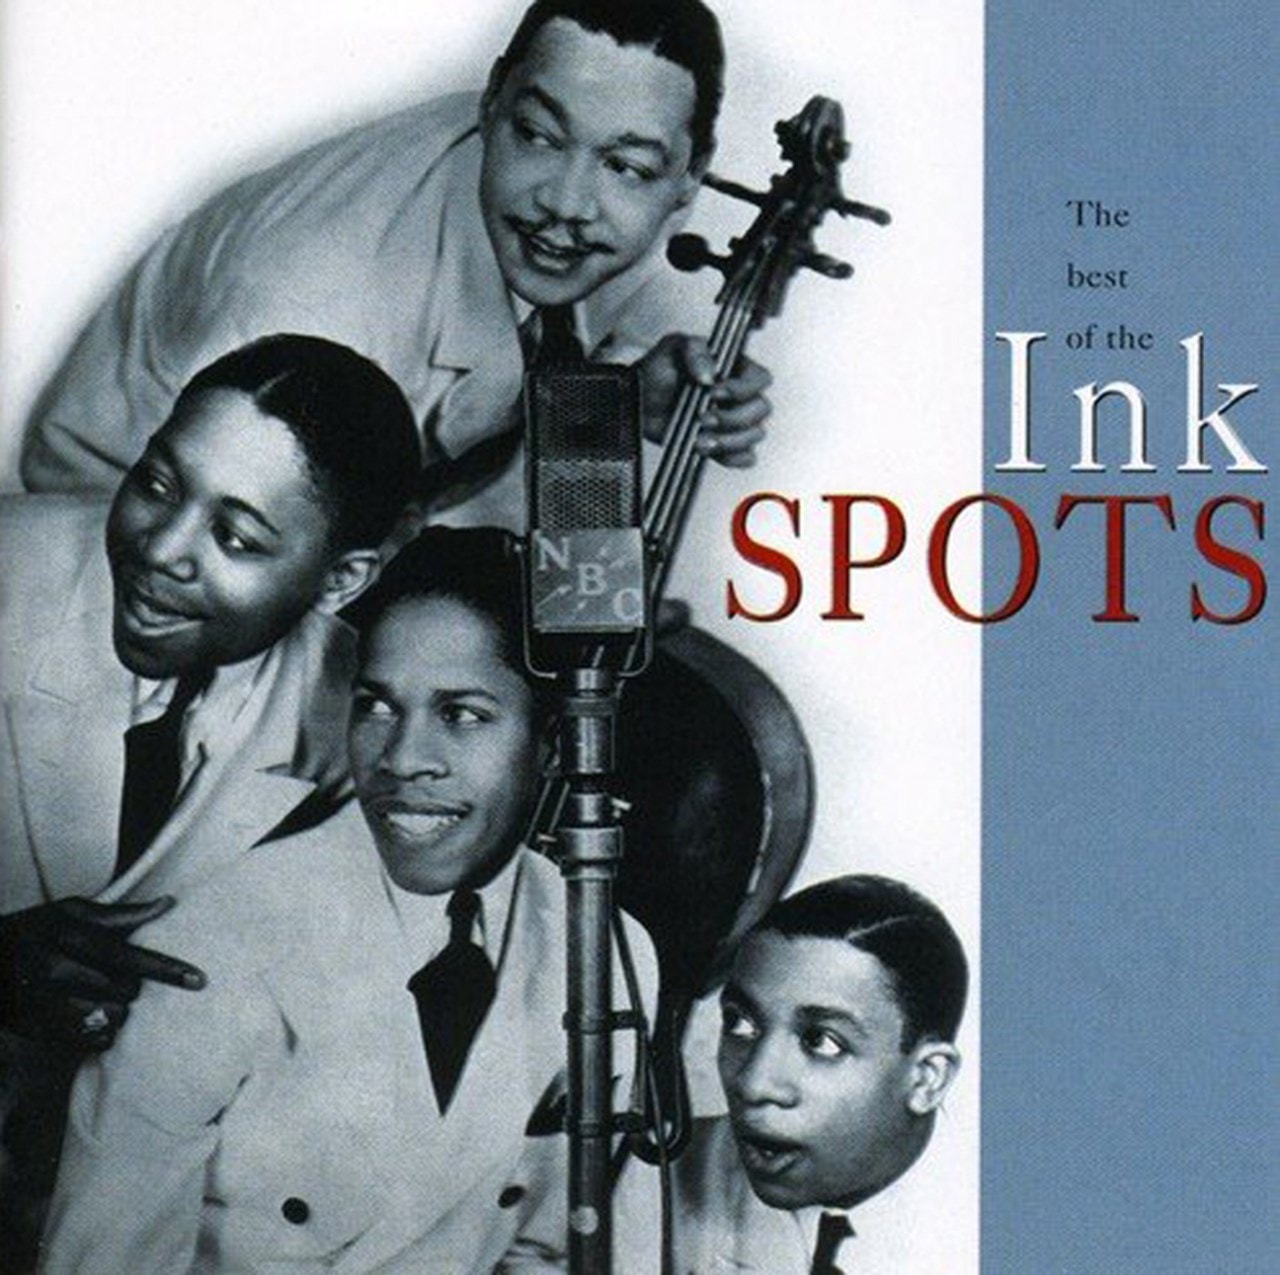 The Best Of The Ink Spots Cd Album Free Shipping Over £20 Hmv Store